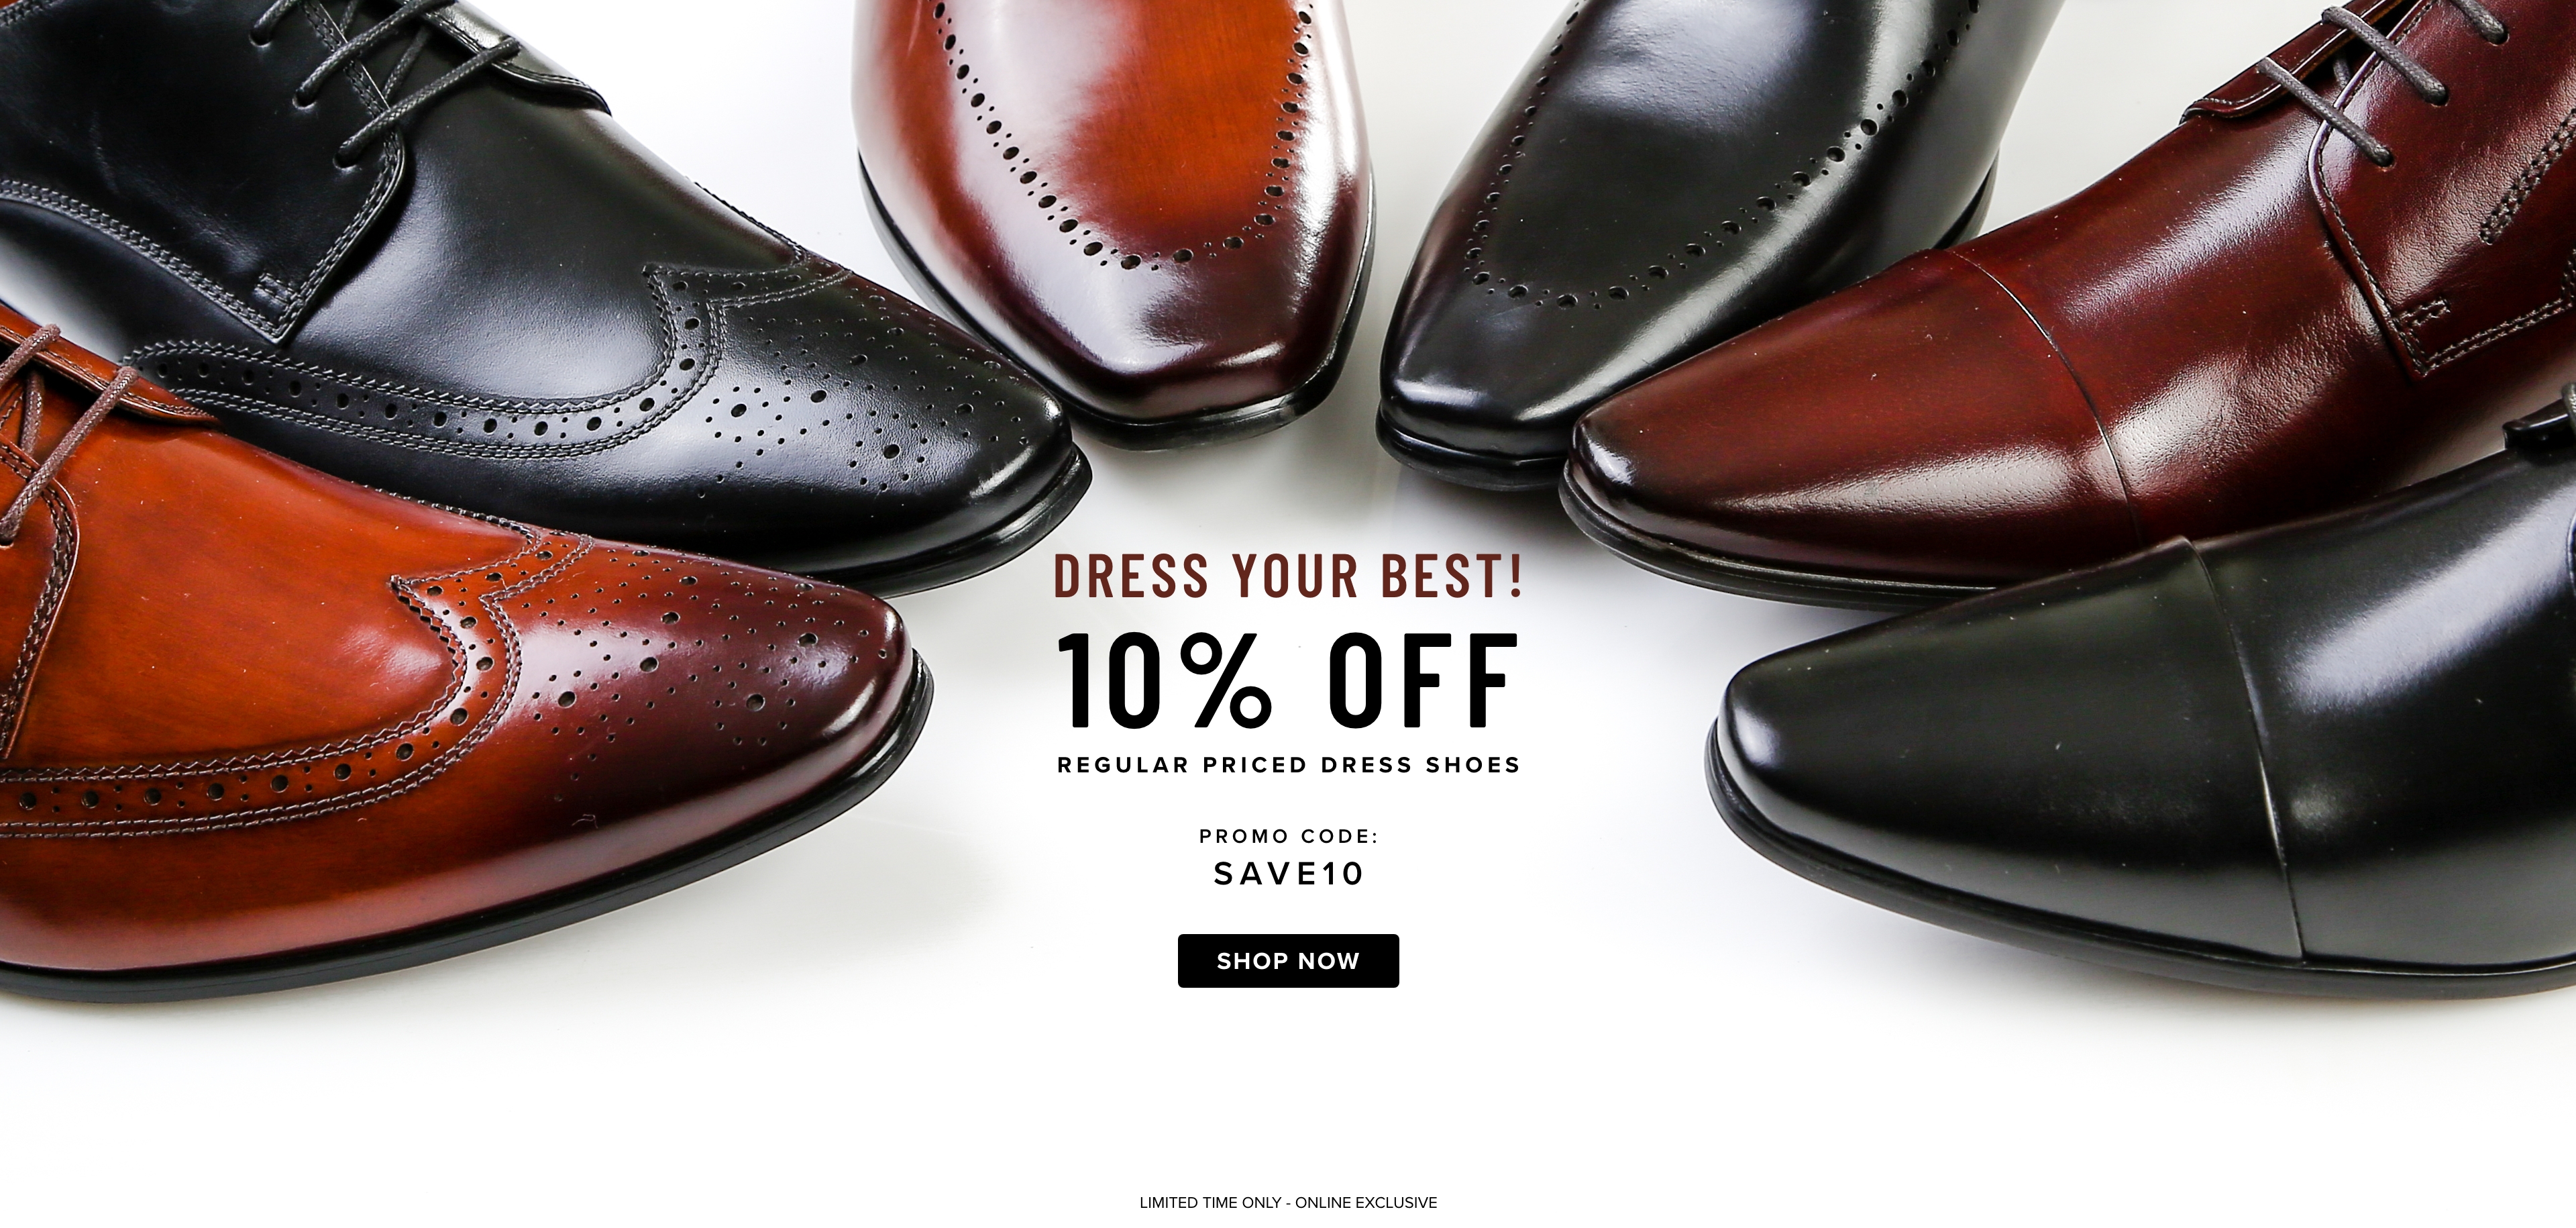 Dress Your Best! 10% Off Regular Priced Dress Shoes. Promo Code: Save10. 